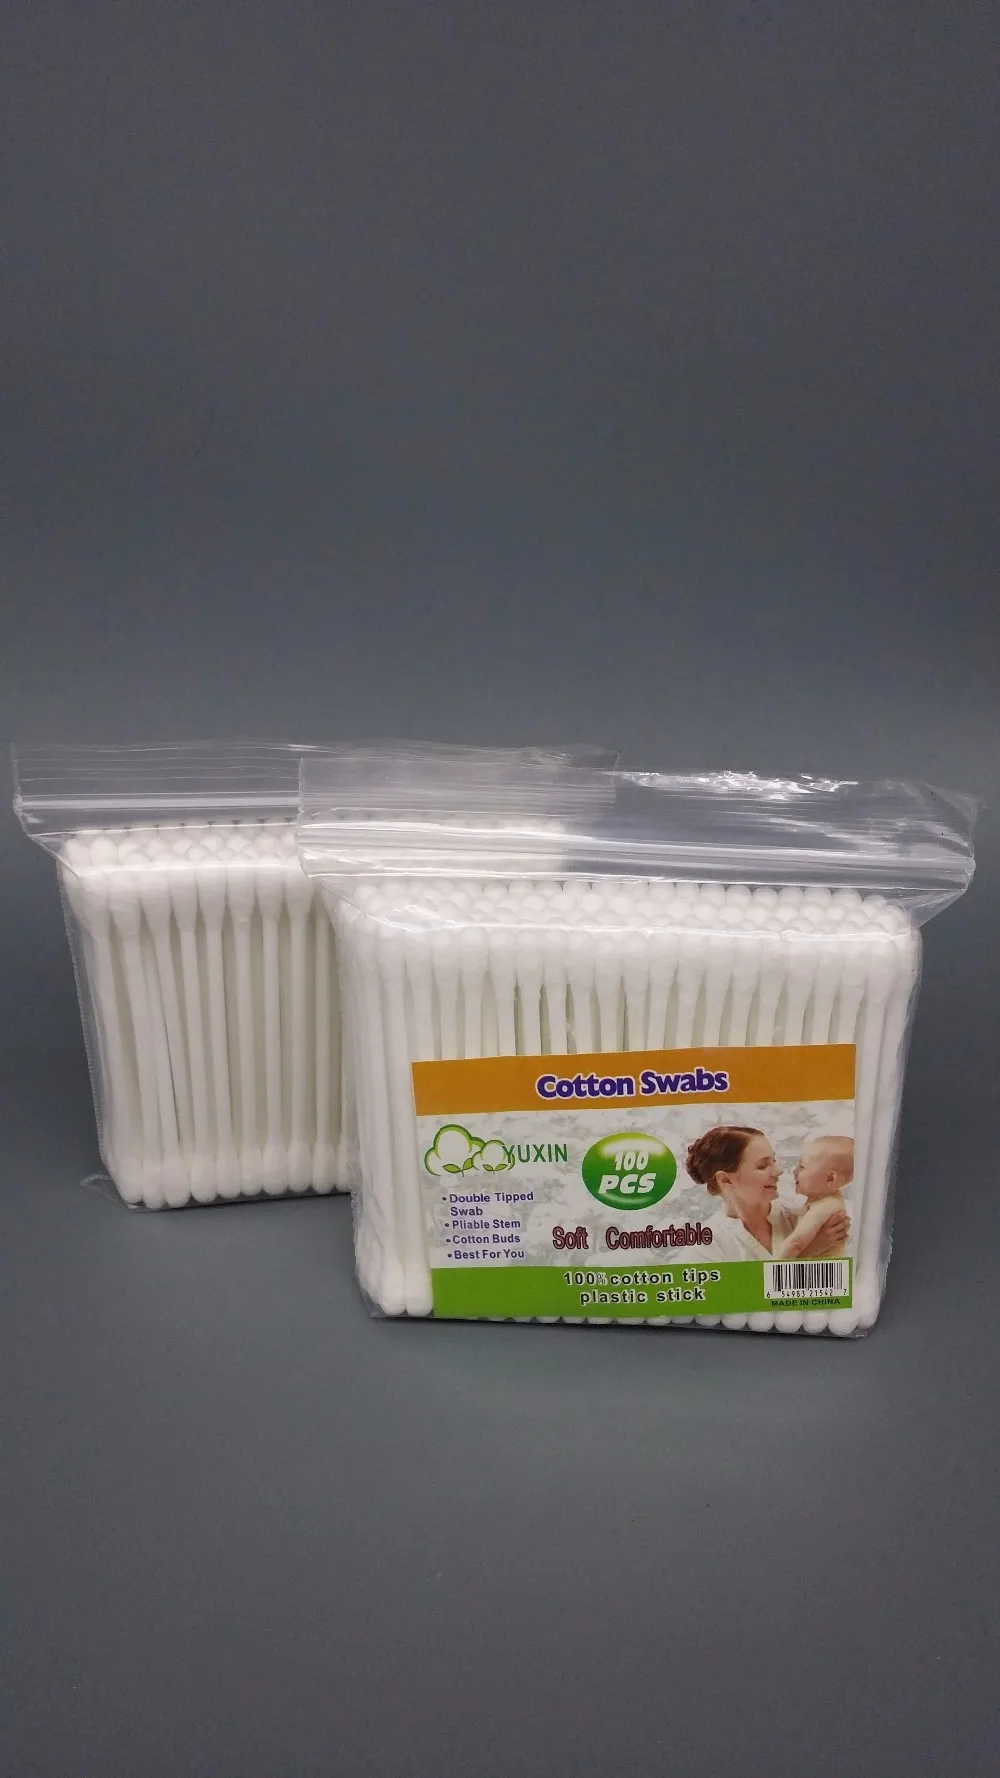 Cleanroom Lint Free Q-tip Cotton Swabs - Buy Customized Cotton Swabs ...